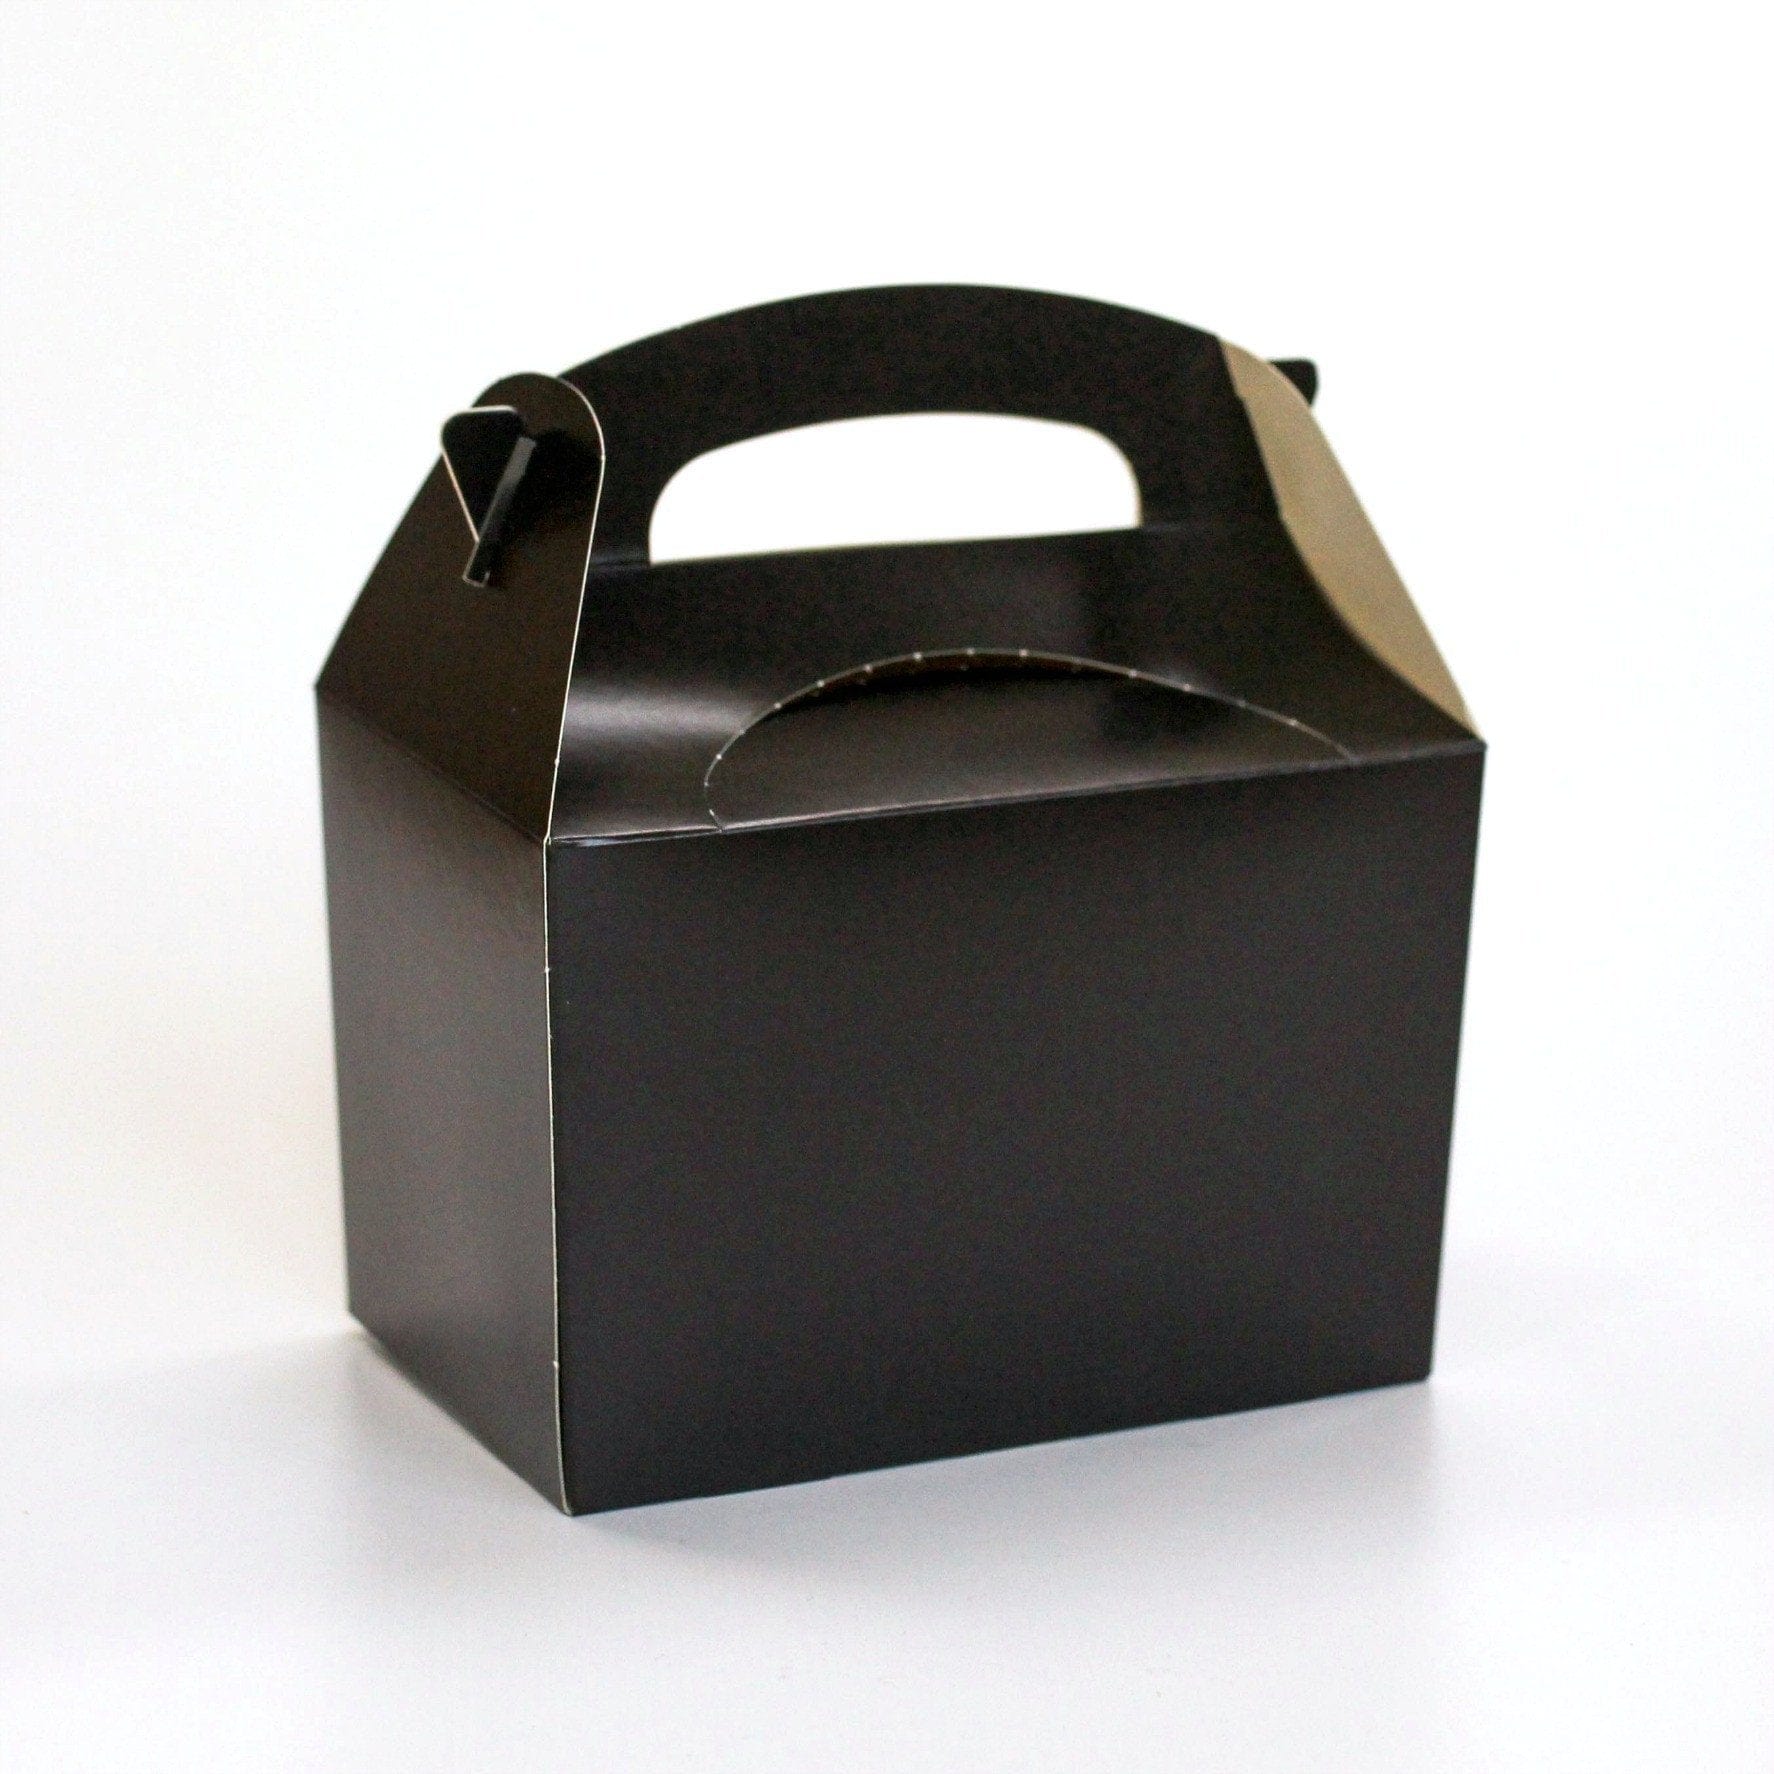 Black Party Lunch Boxes | Party Boxes & Party Food Ideas Online UK Oaktree UK